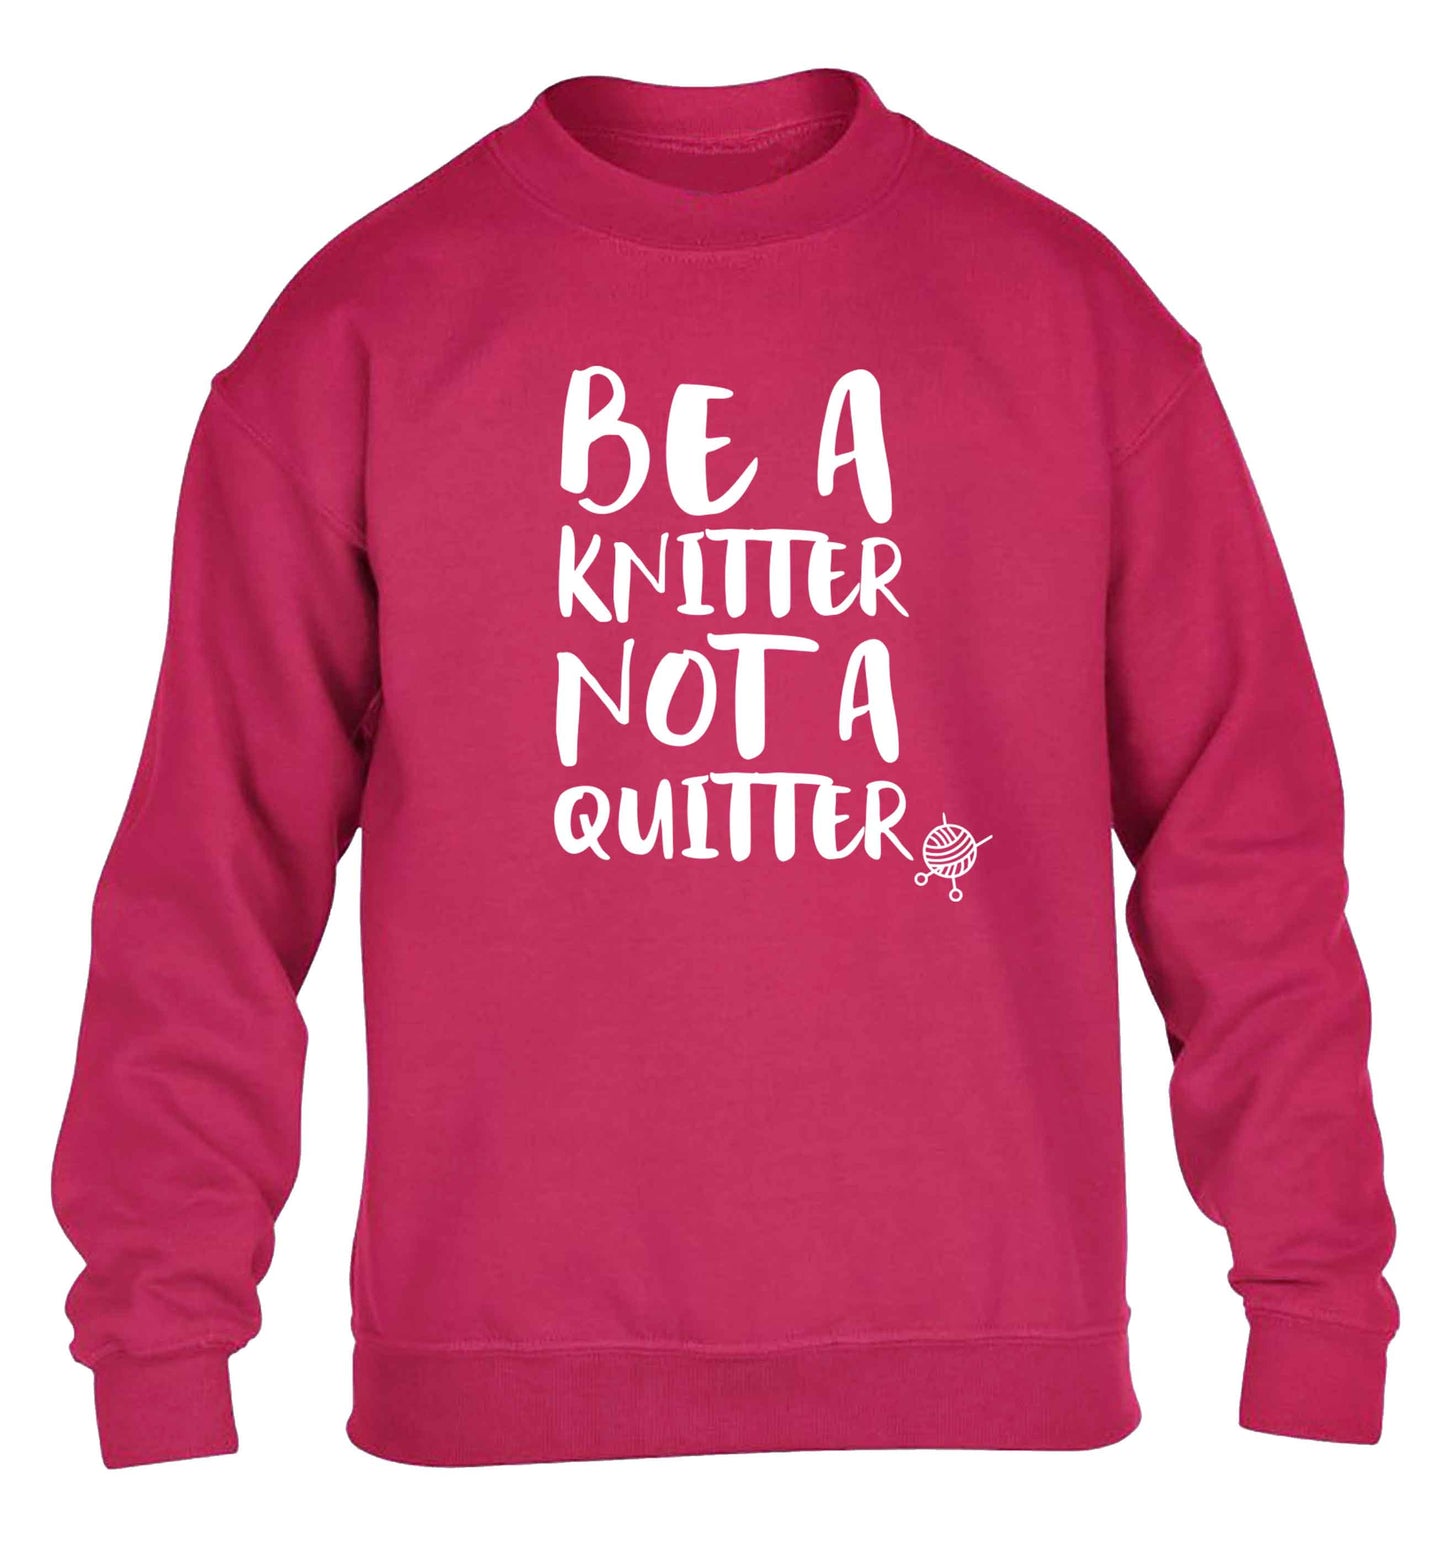 Be a knitter not a quitter children's pink sweater 12-13 Years